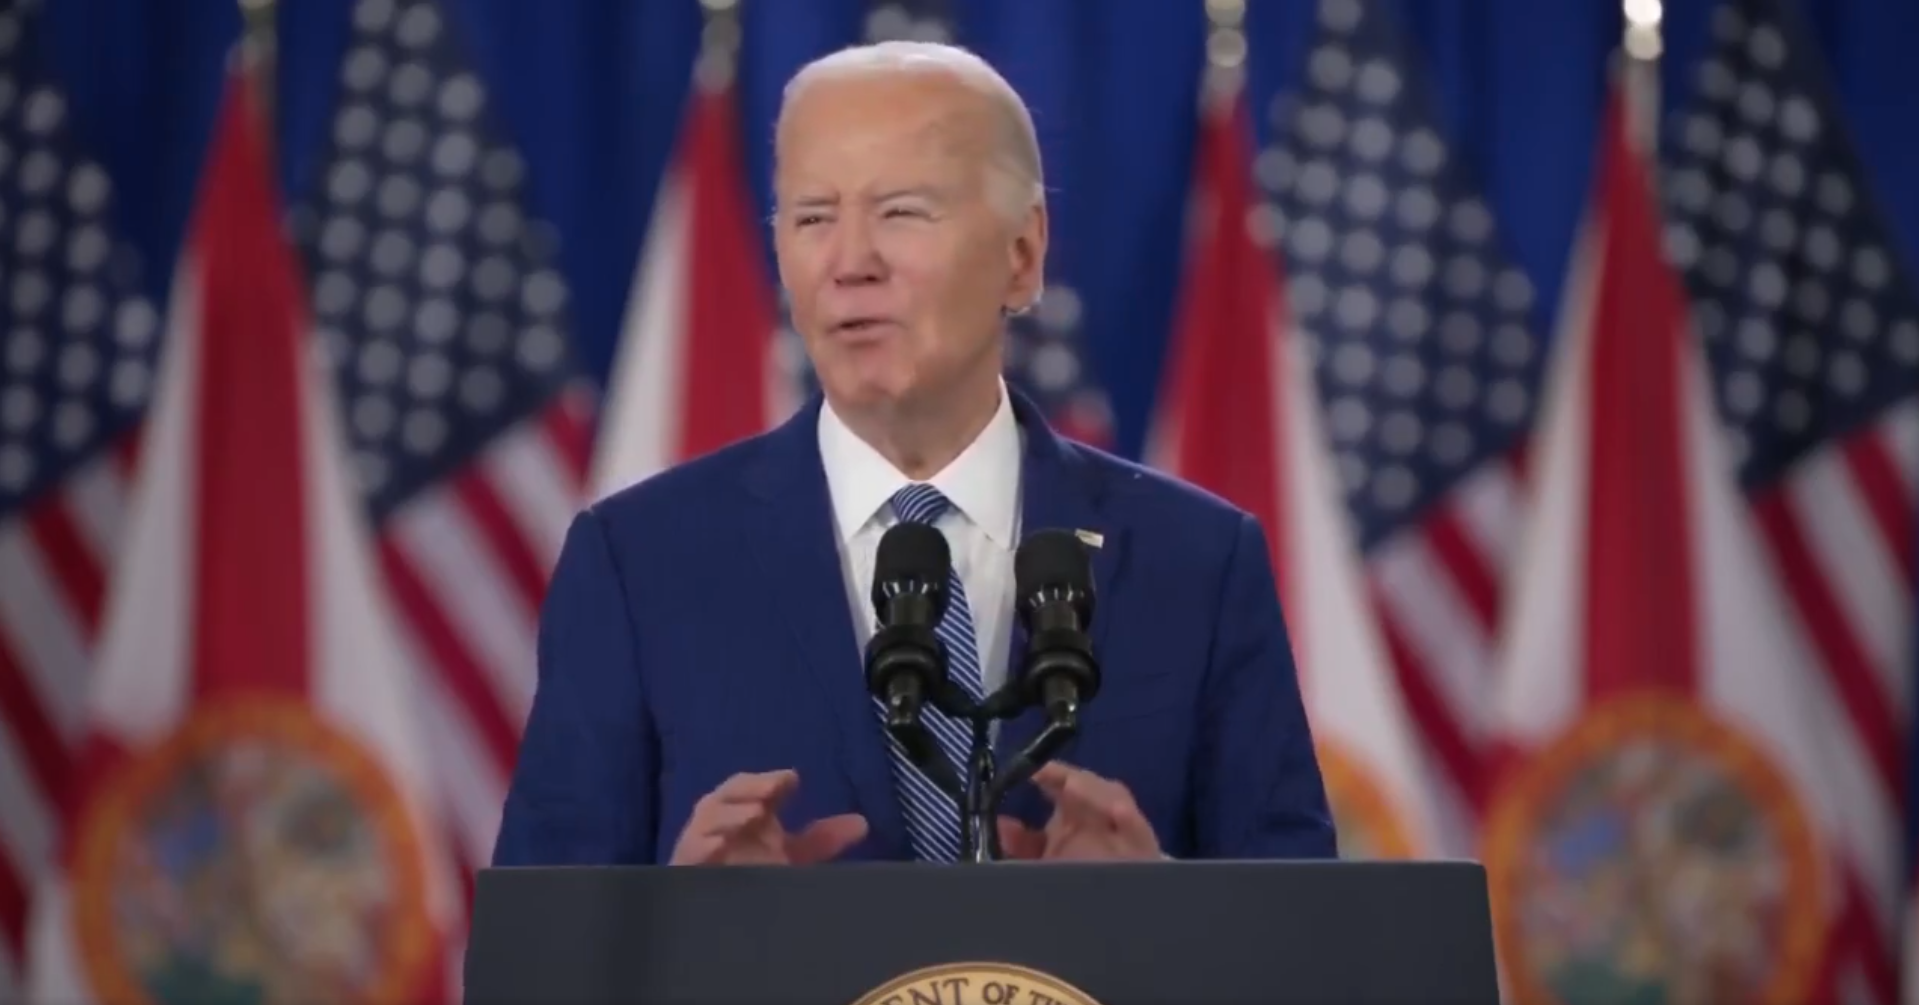 Biden Mocked After Making Major Gaffe While Attacking Trump: ‘We Can’t Be Trusted’